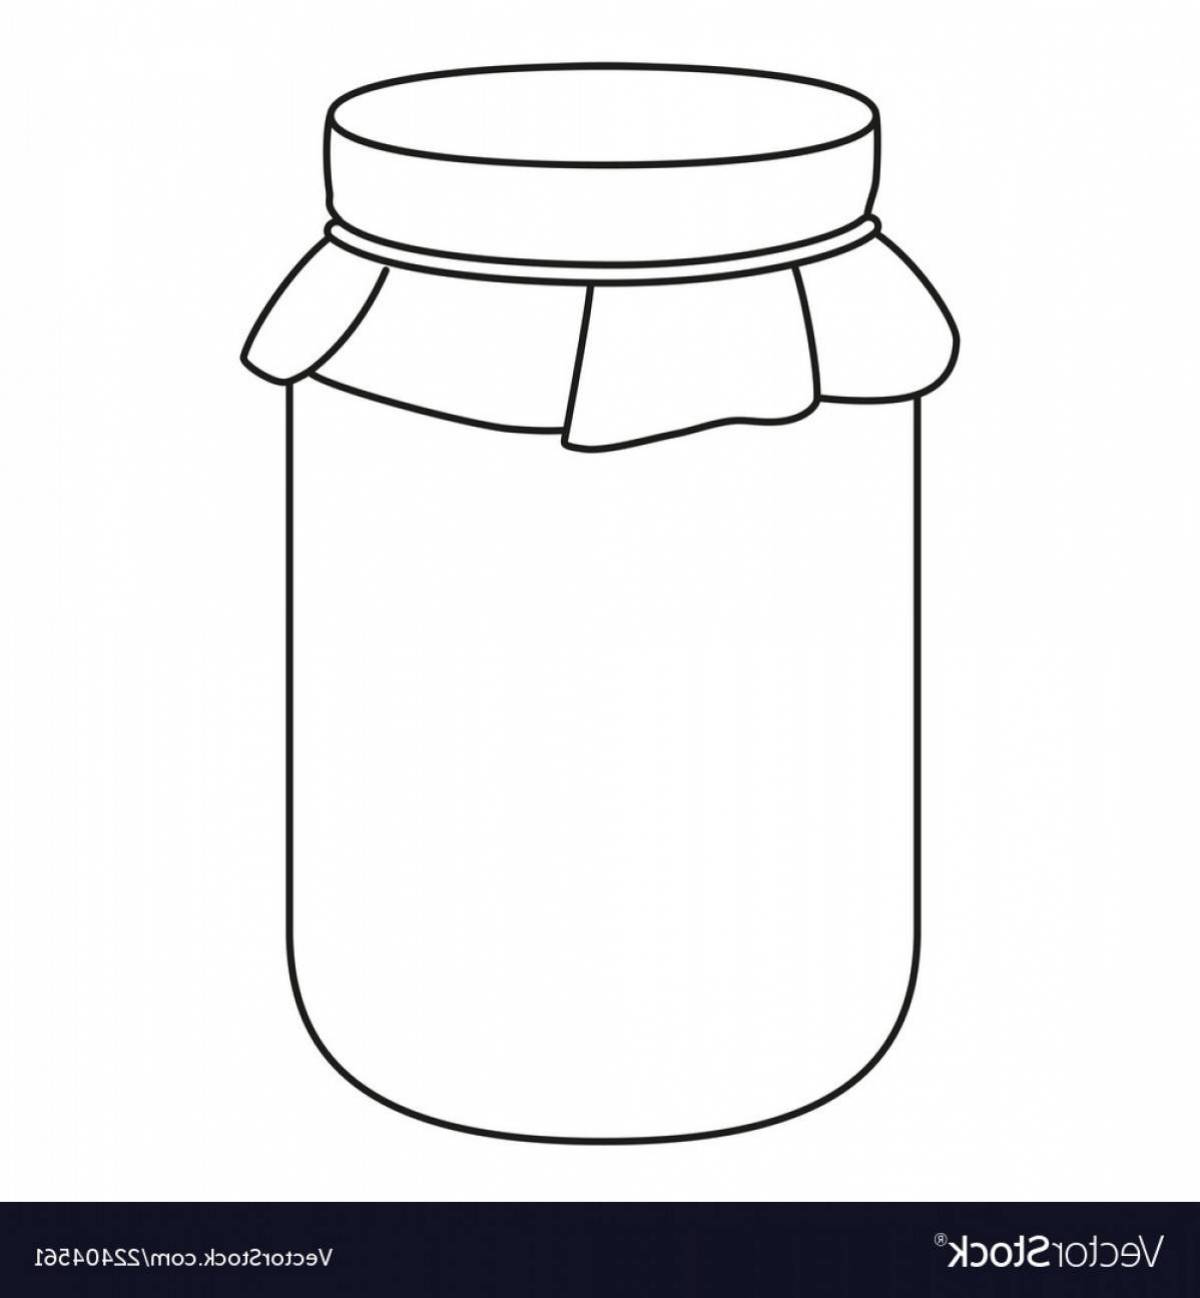 Beautiful jar coloring page for kids